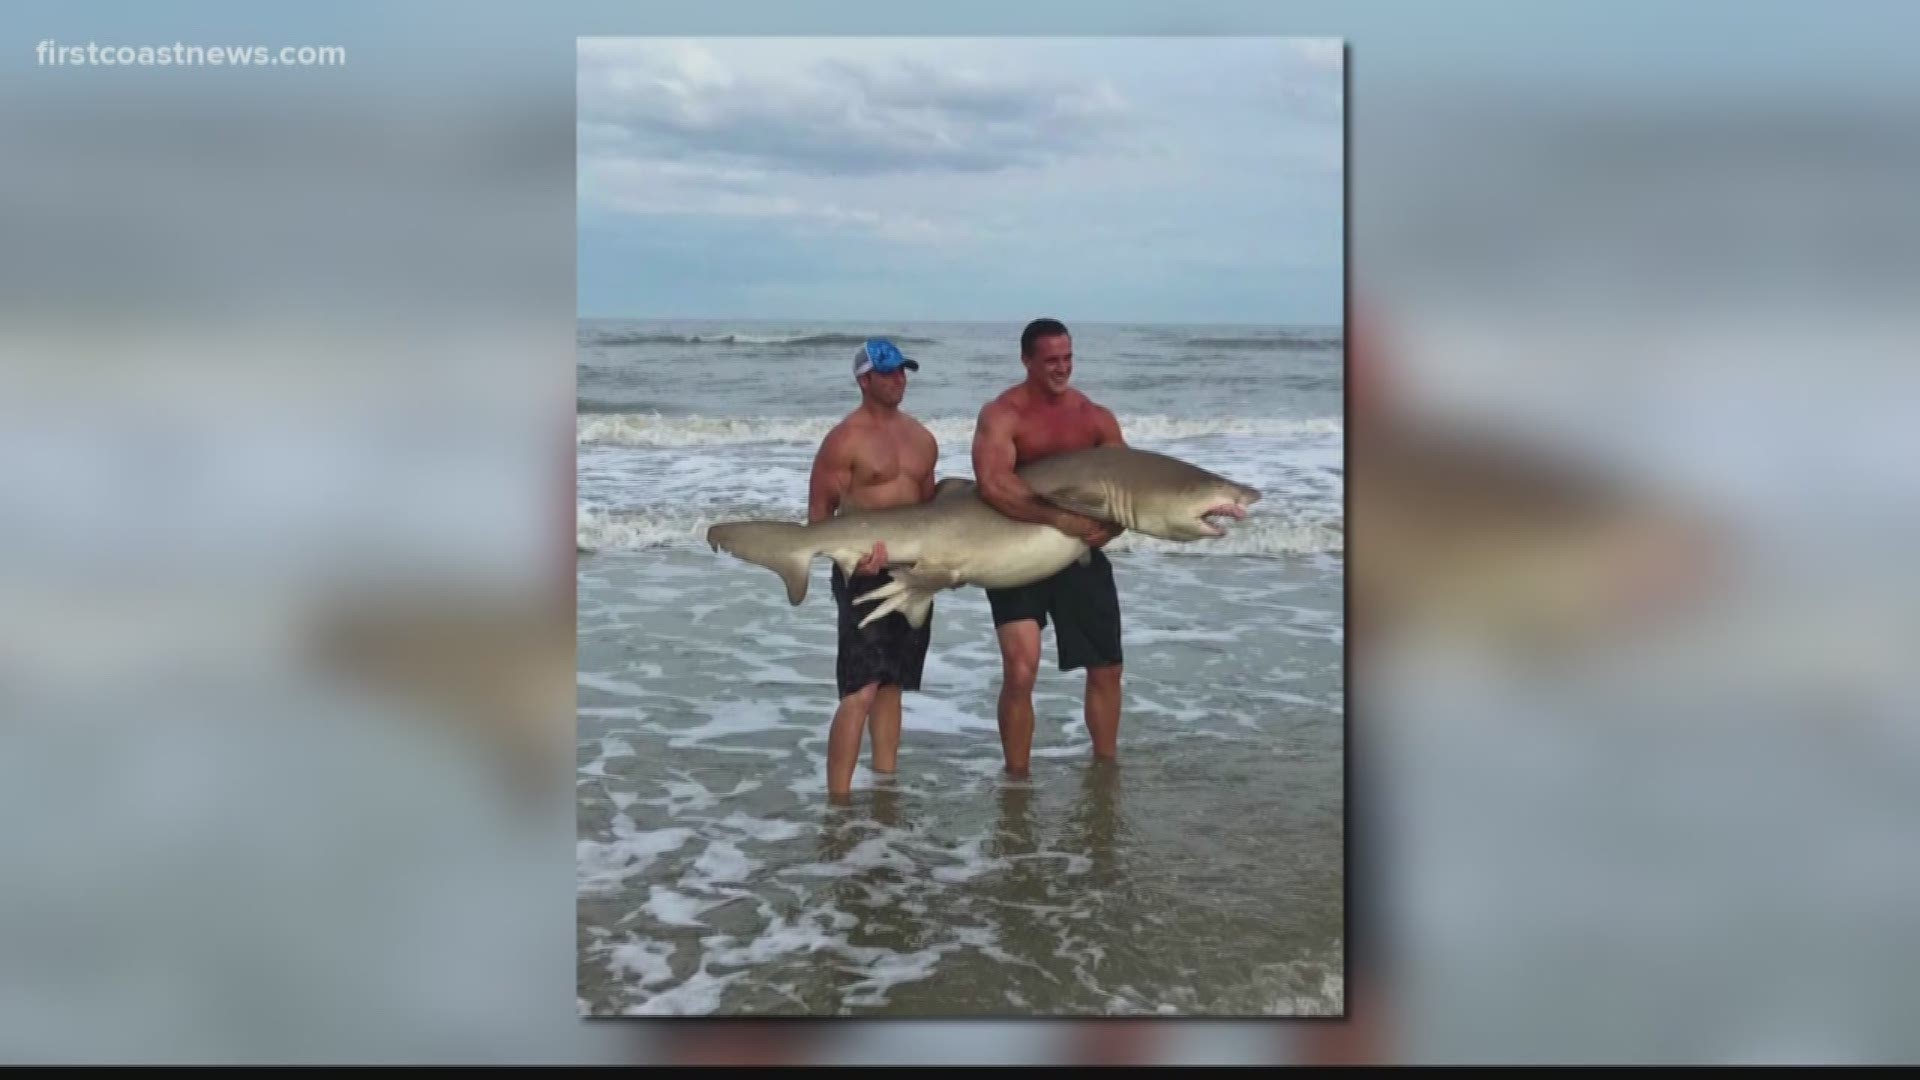 Robert Arnemann and Matt Gaston say they've never caught a shark this huge before and had no intentions of catching the one in their viral picture.